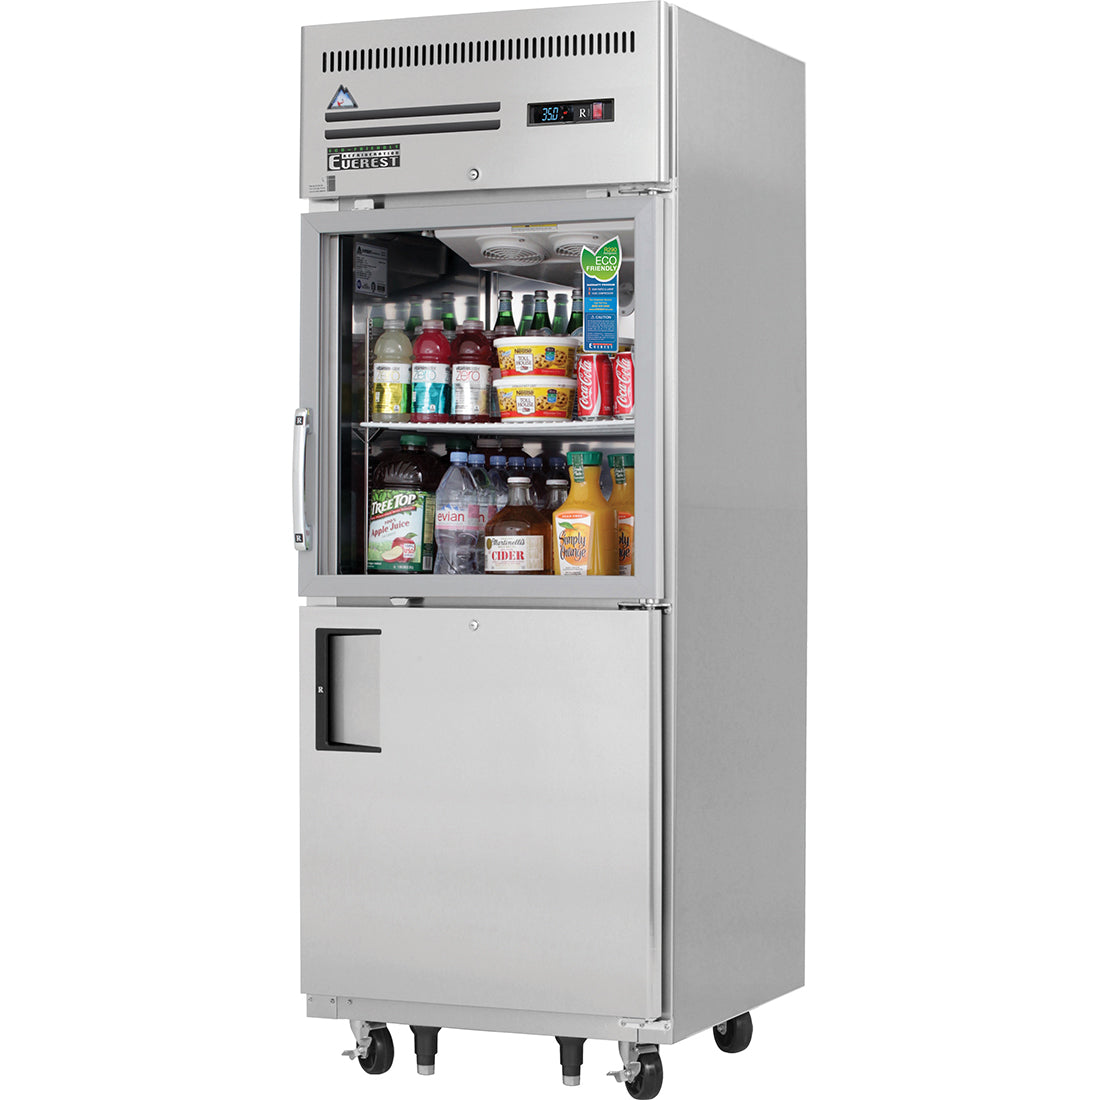 Everest ES Series-EGSH2 One Section Glass/Solid Half Door Upright Reach-In Refrigerator - 23 Cu. Ft.